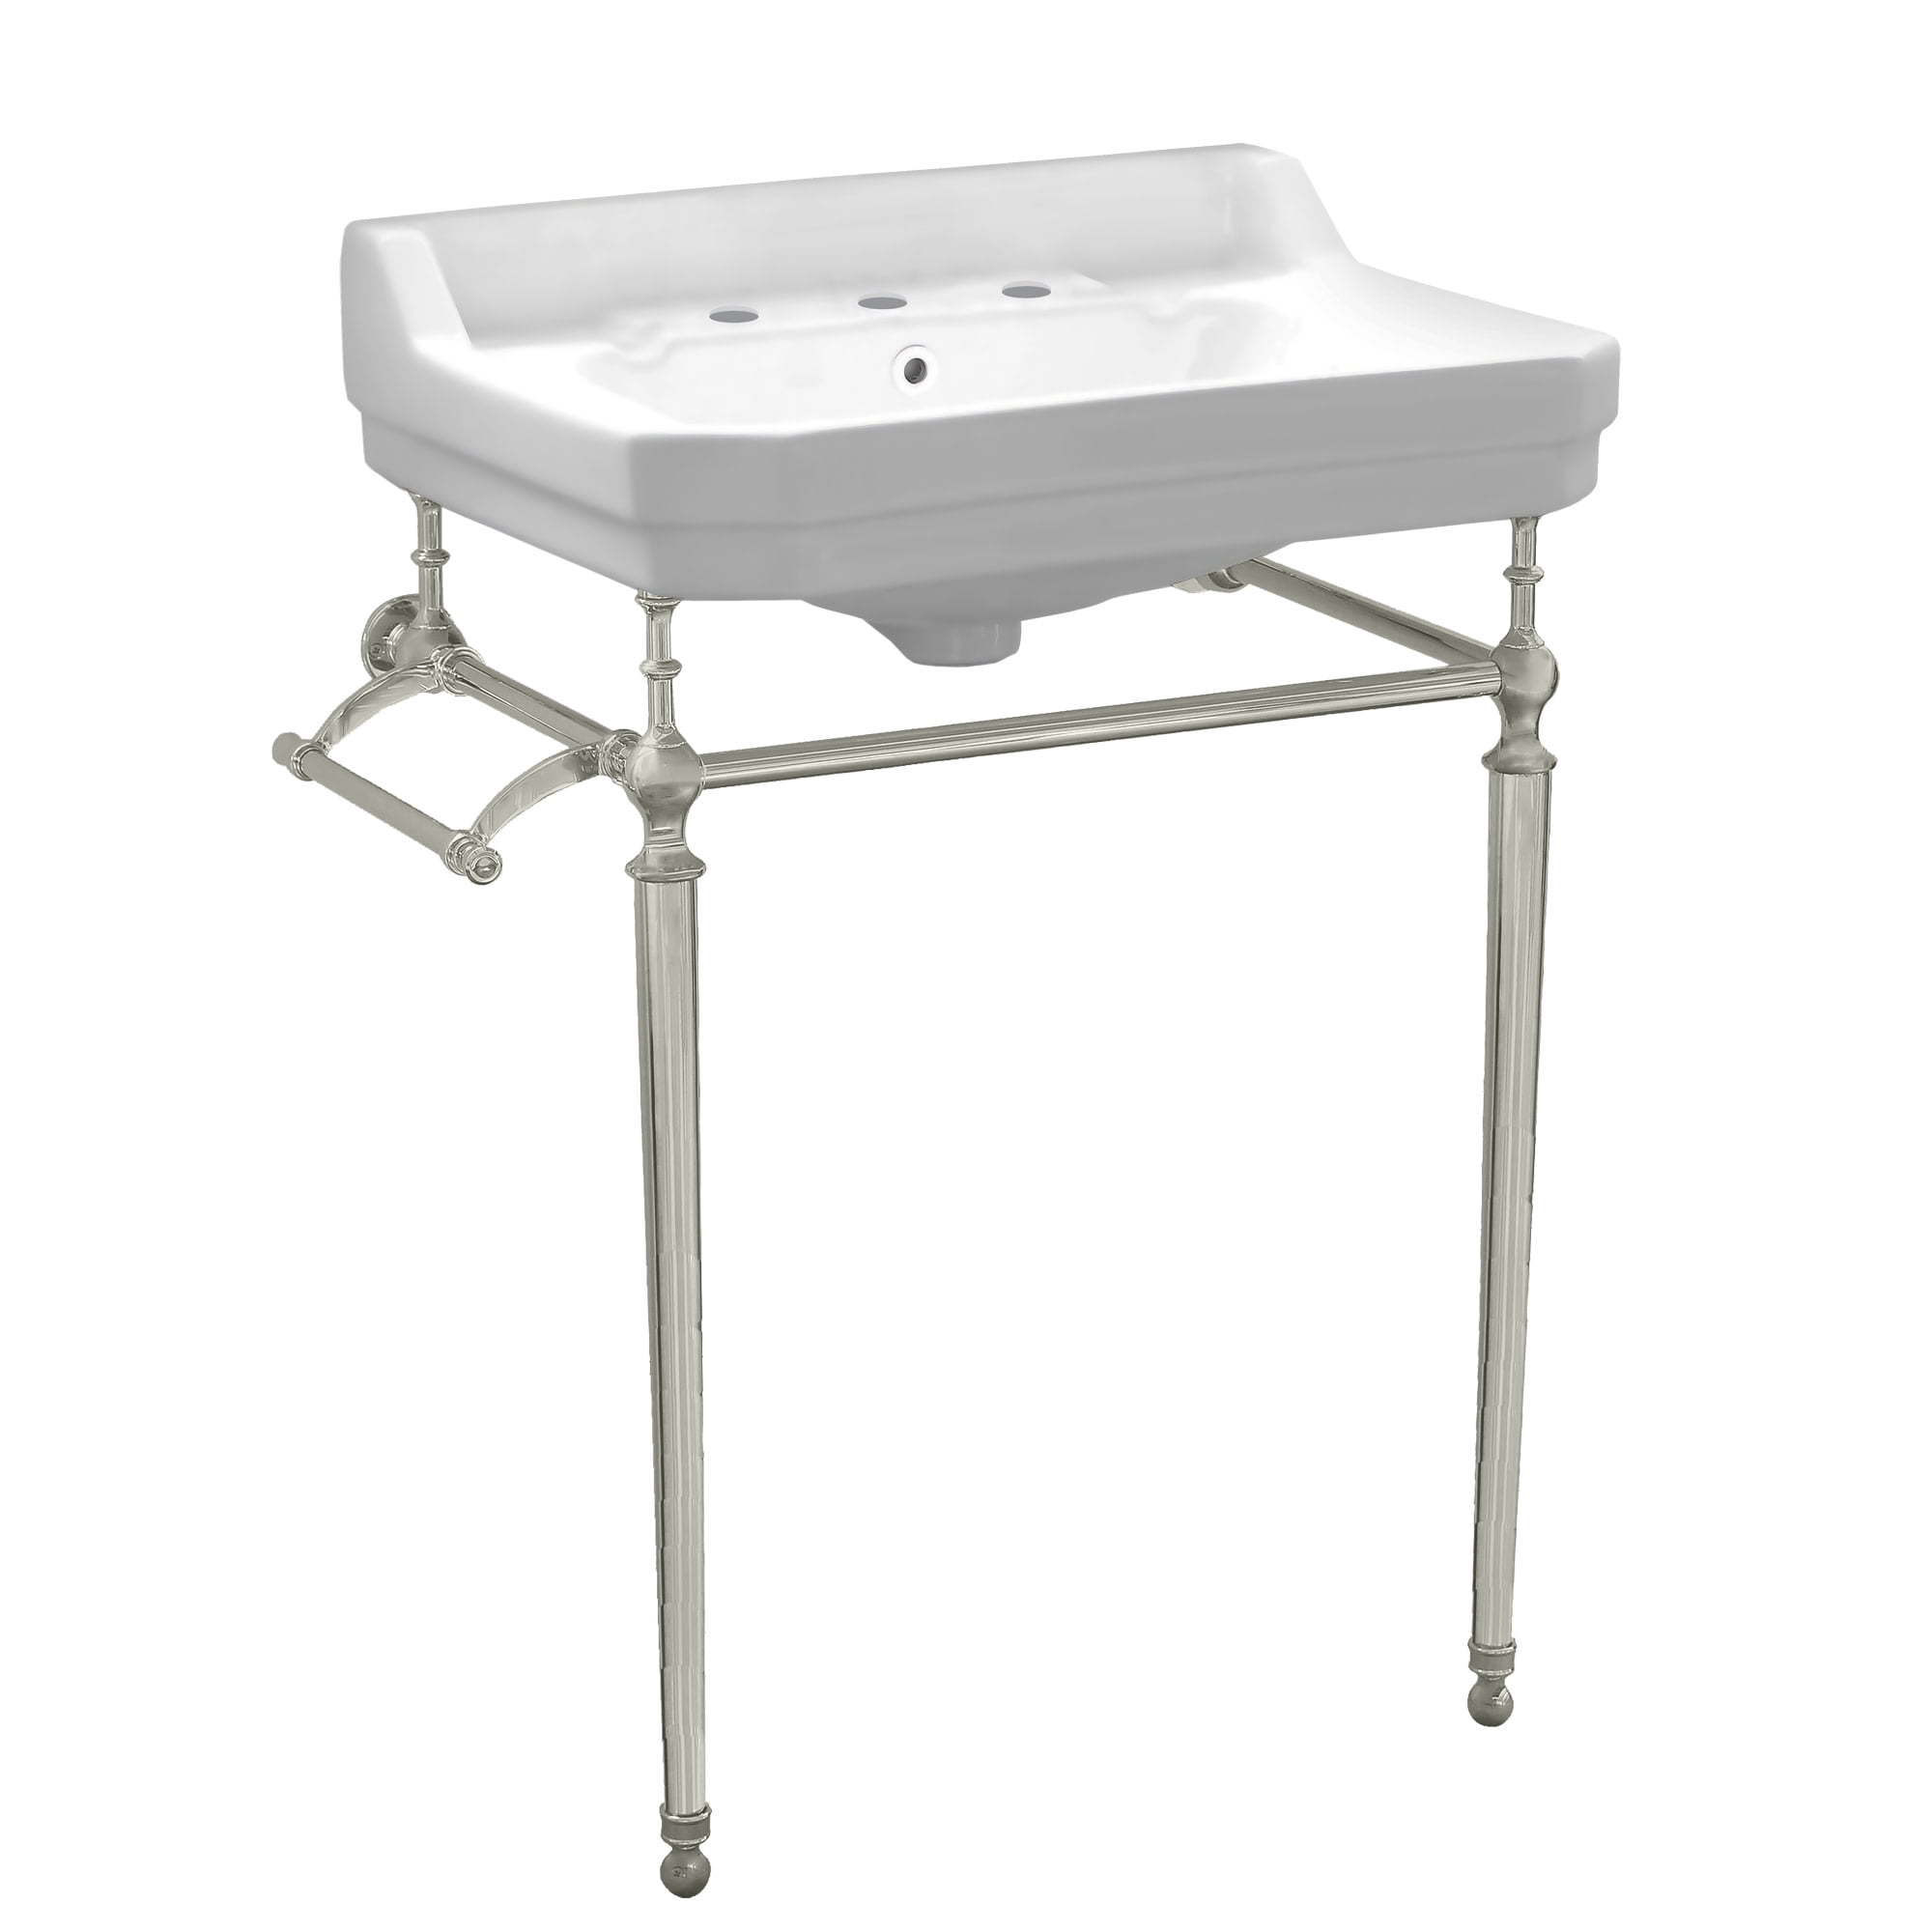 Whv024-l33-3h-bn Victoriahaus Console With Integrated Rectangular Bowl & Three-hole - Brushed Nickel